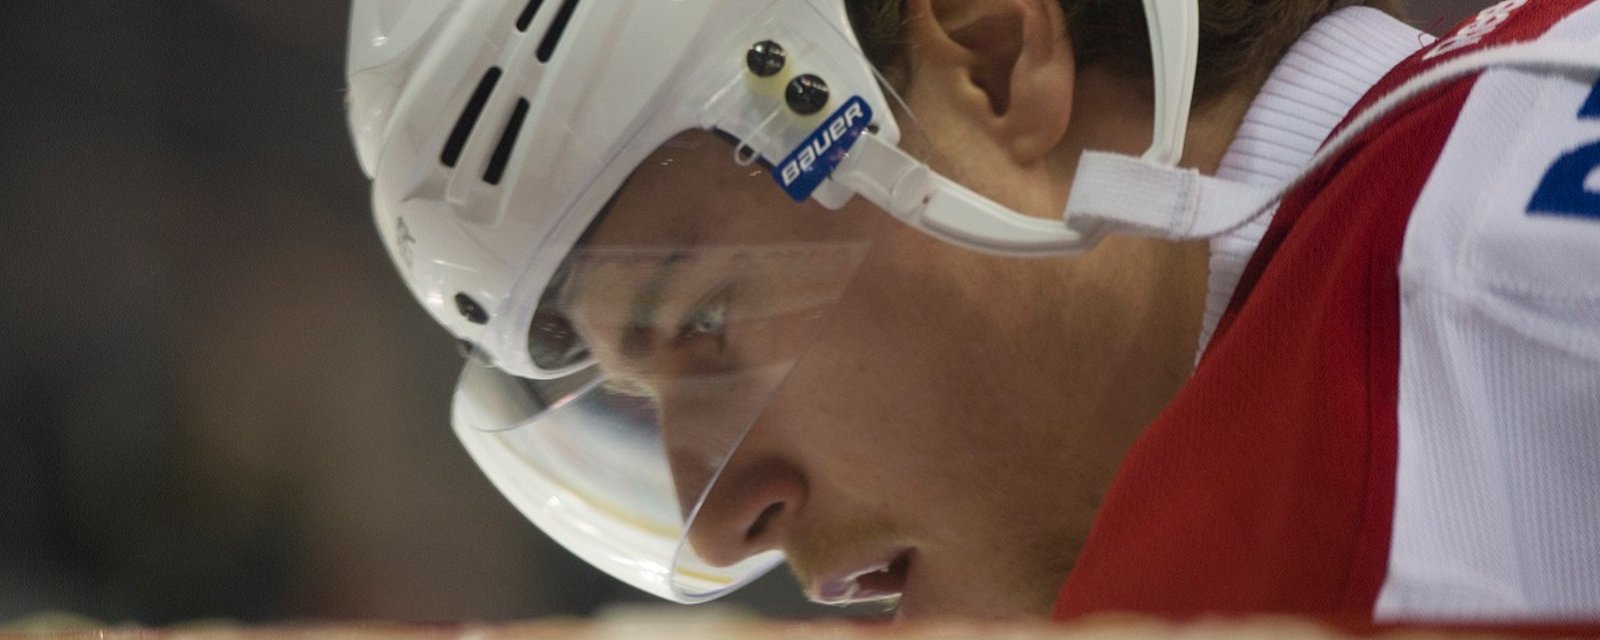 Update: Habs defenseman released from hospital, still appears seriously hurt.